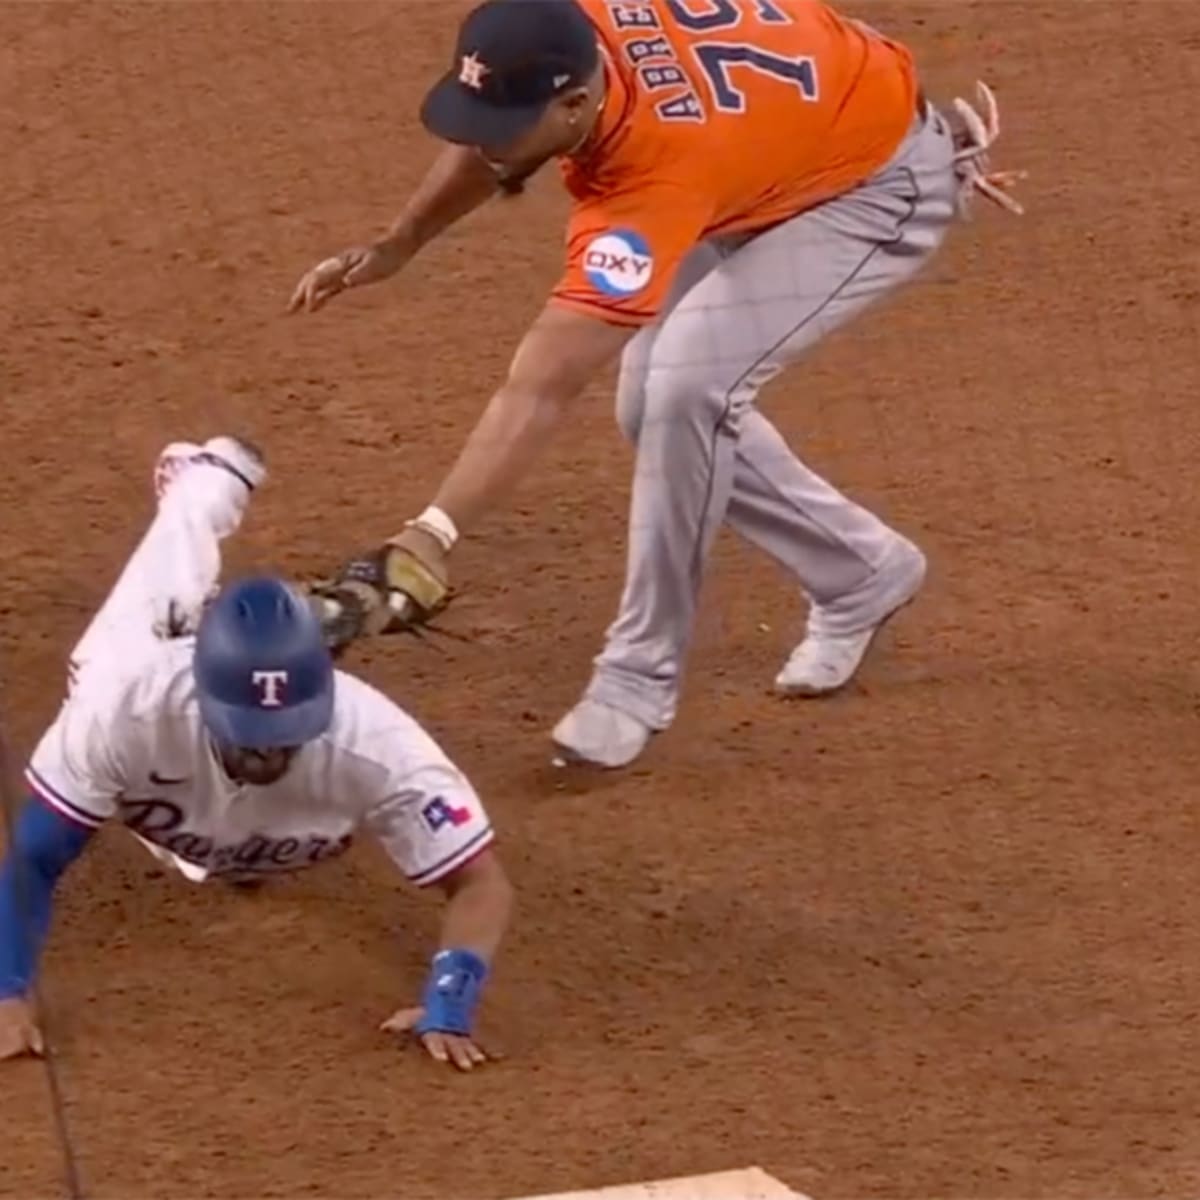 Rangers' Marcus Semien Was Bizarrely Tagged Out By the Batting